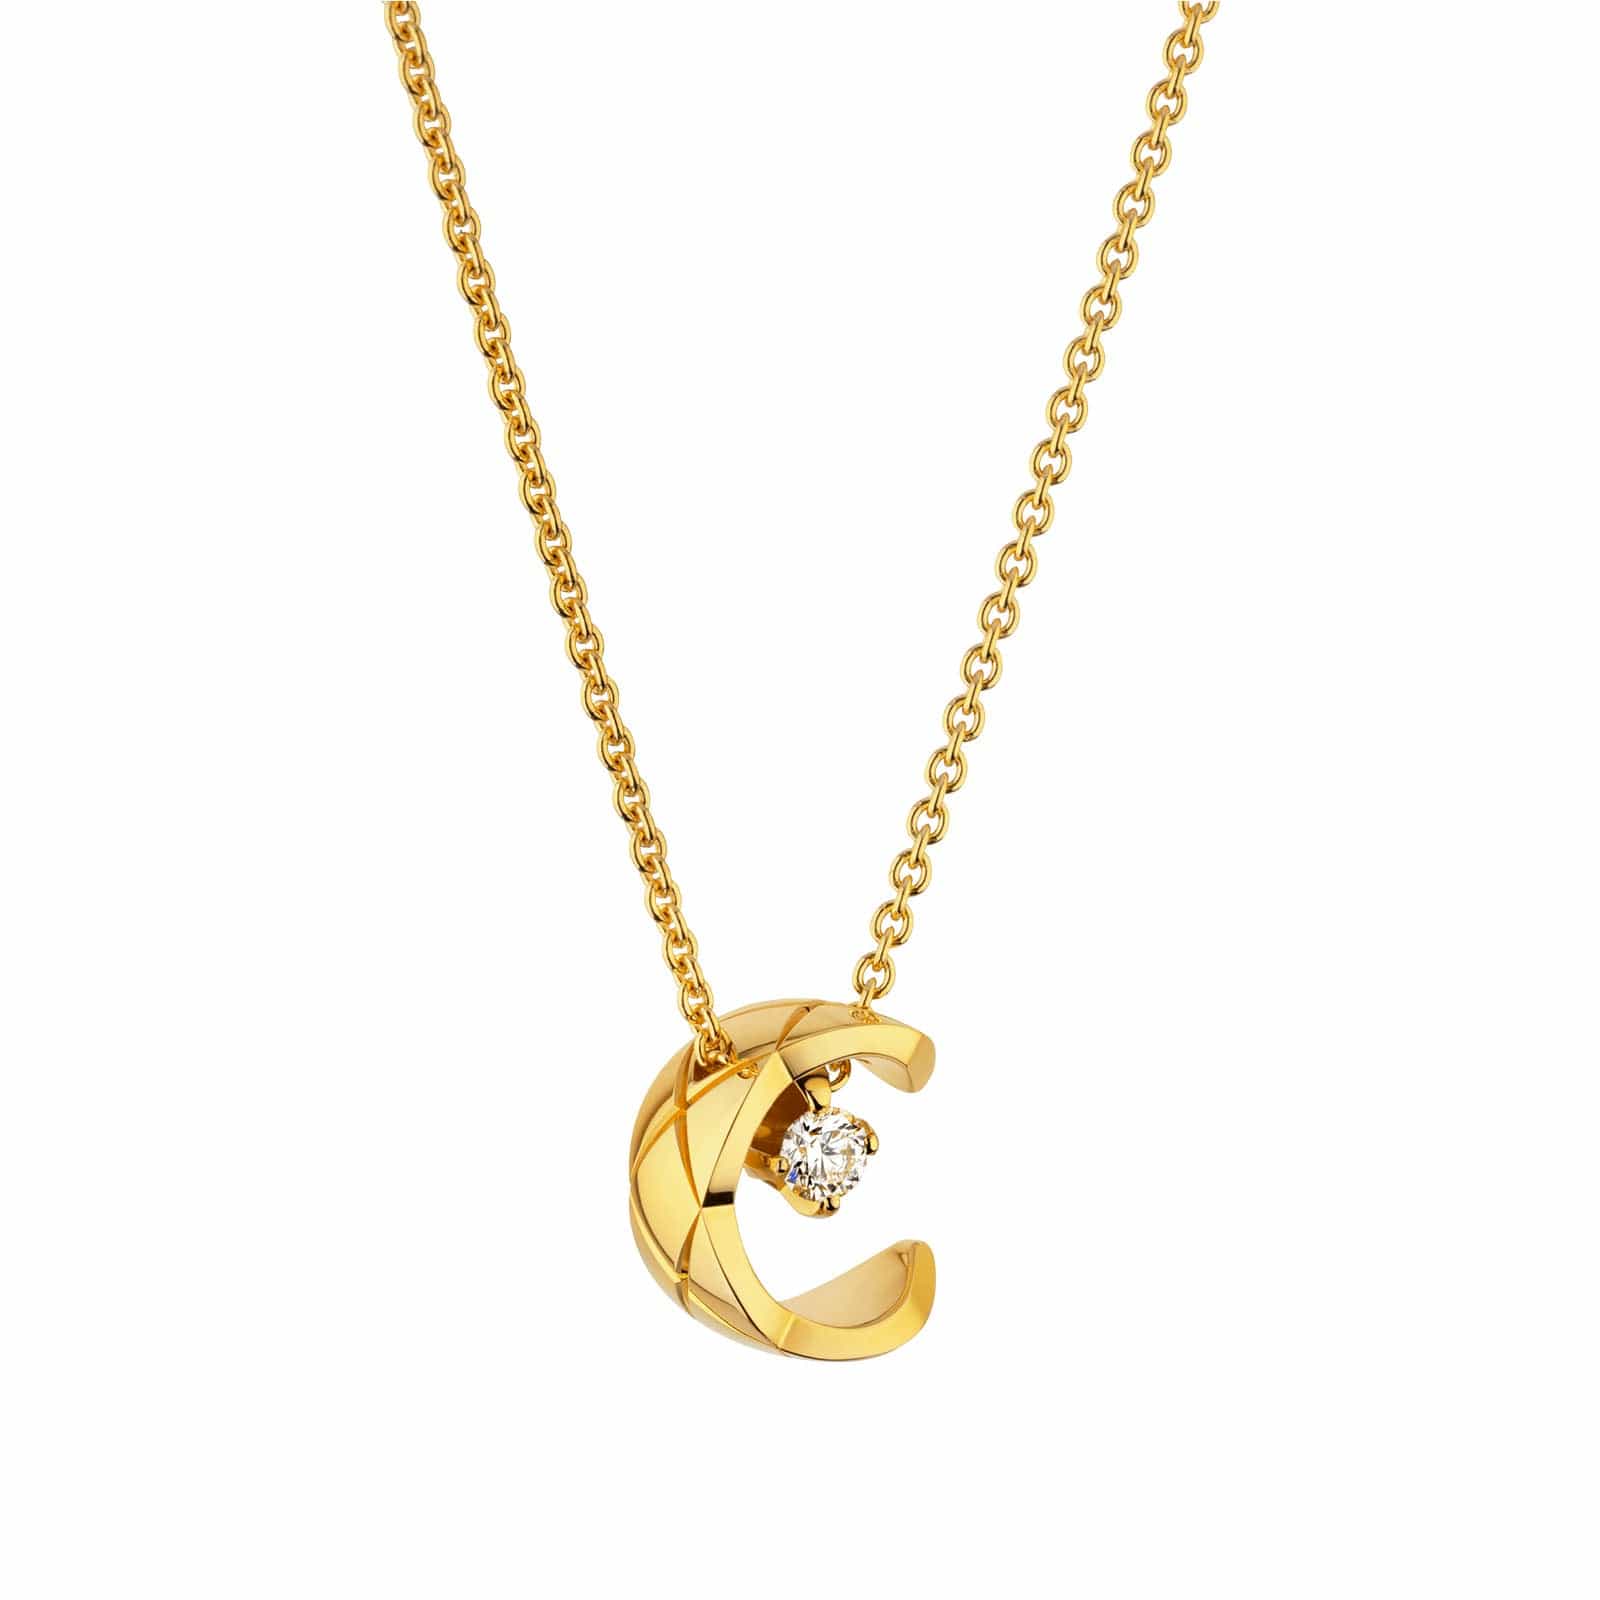 Coco Necklace by Chanel